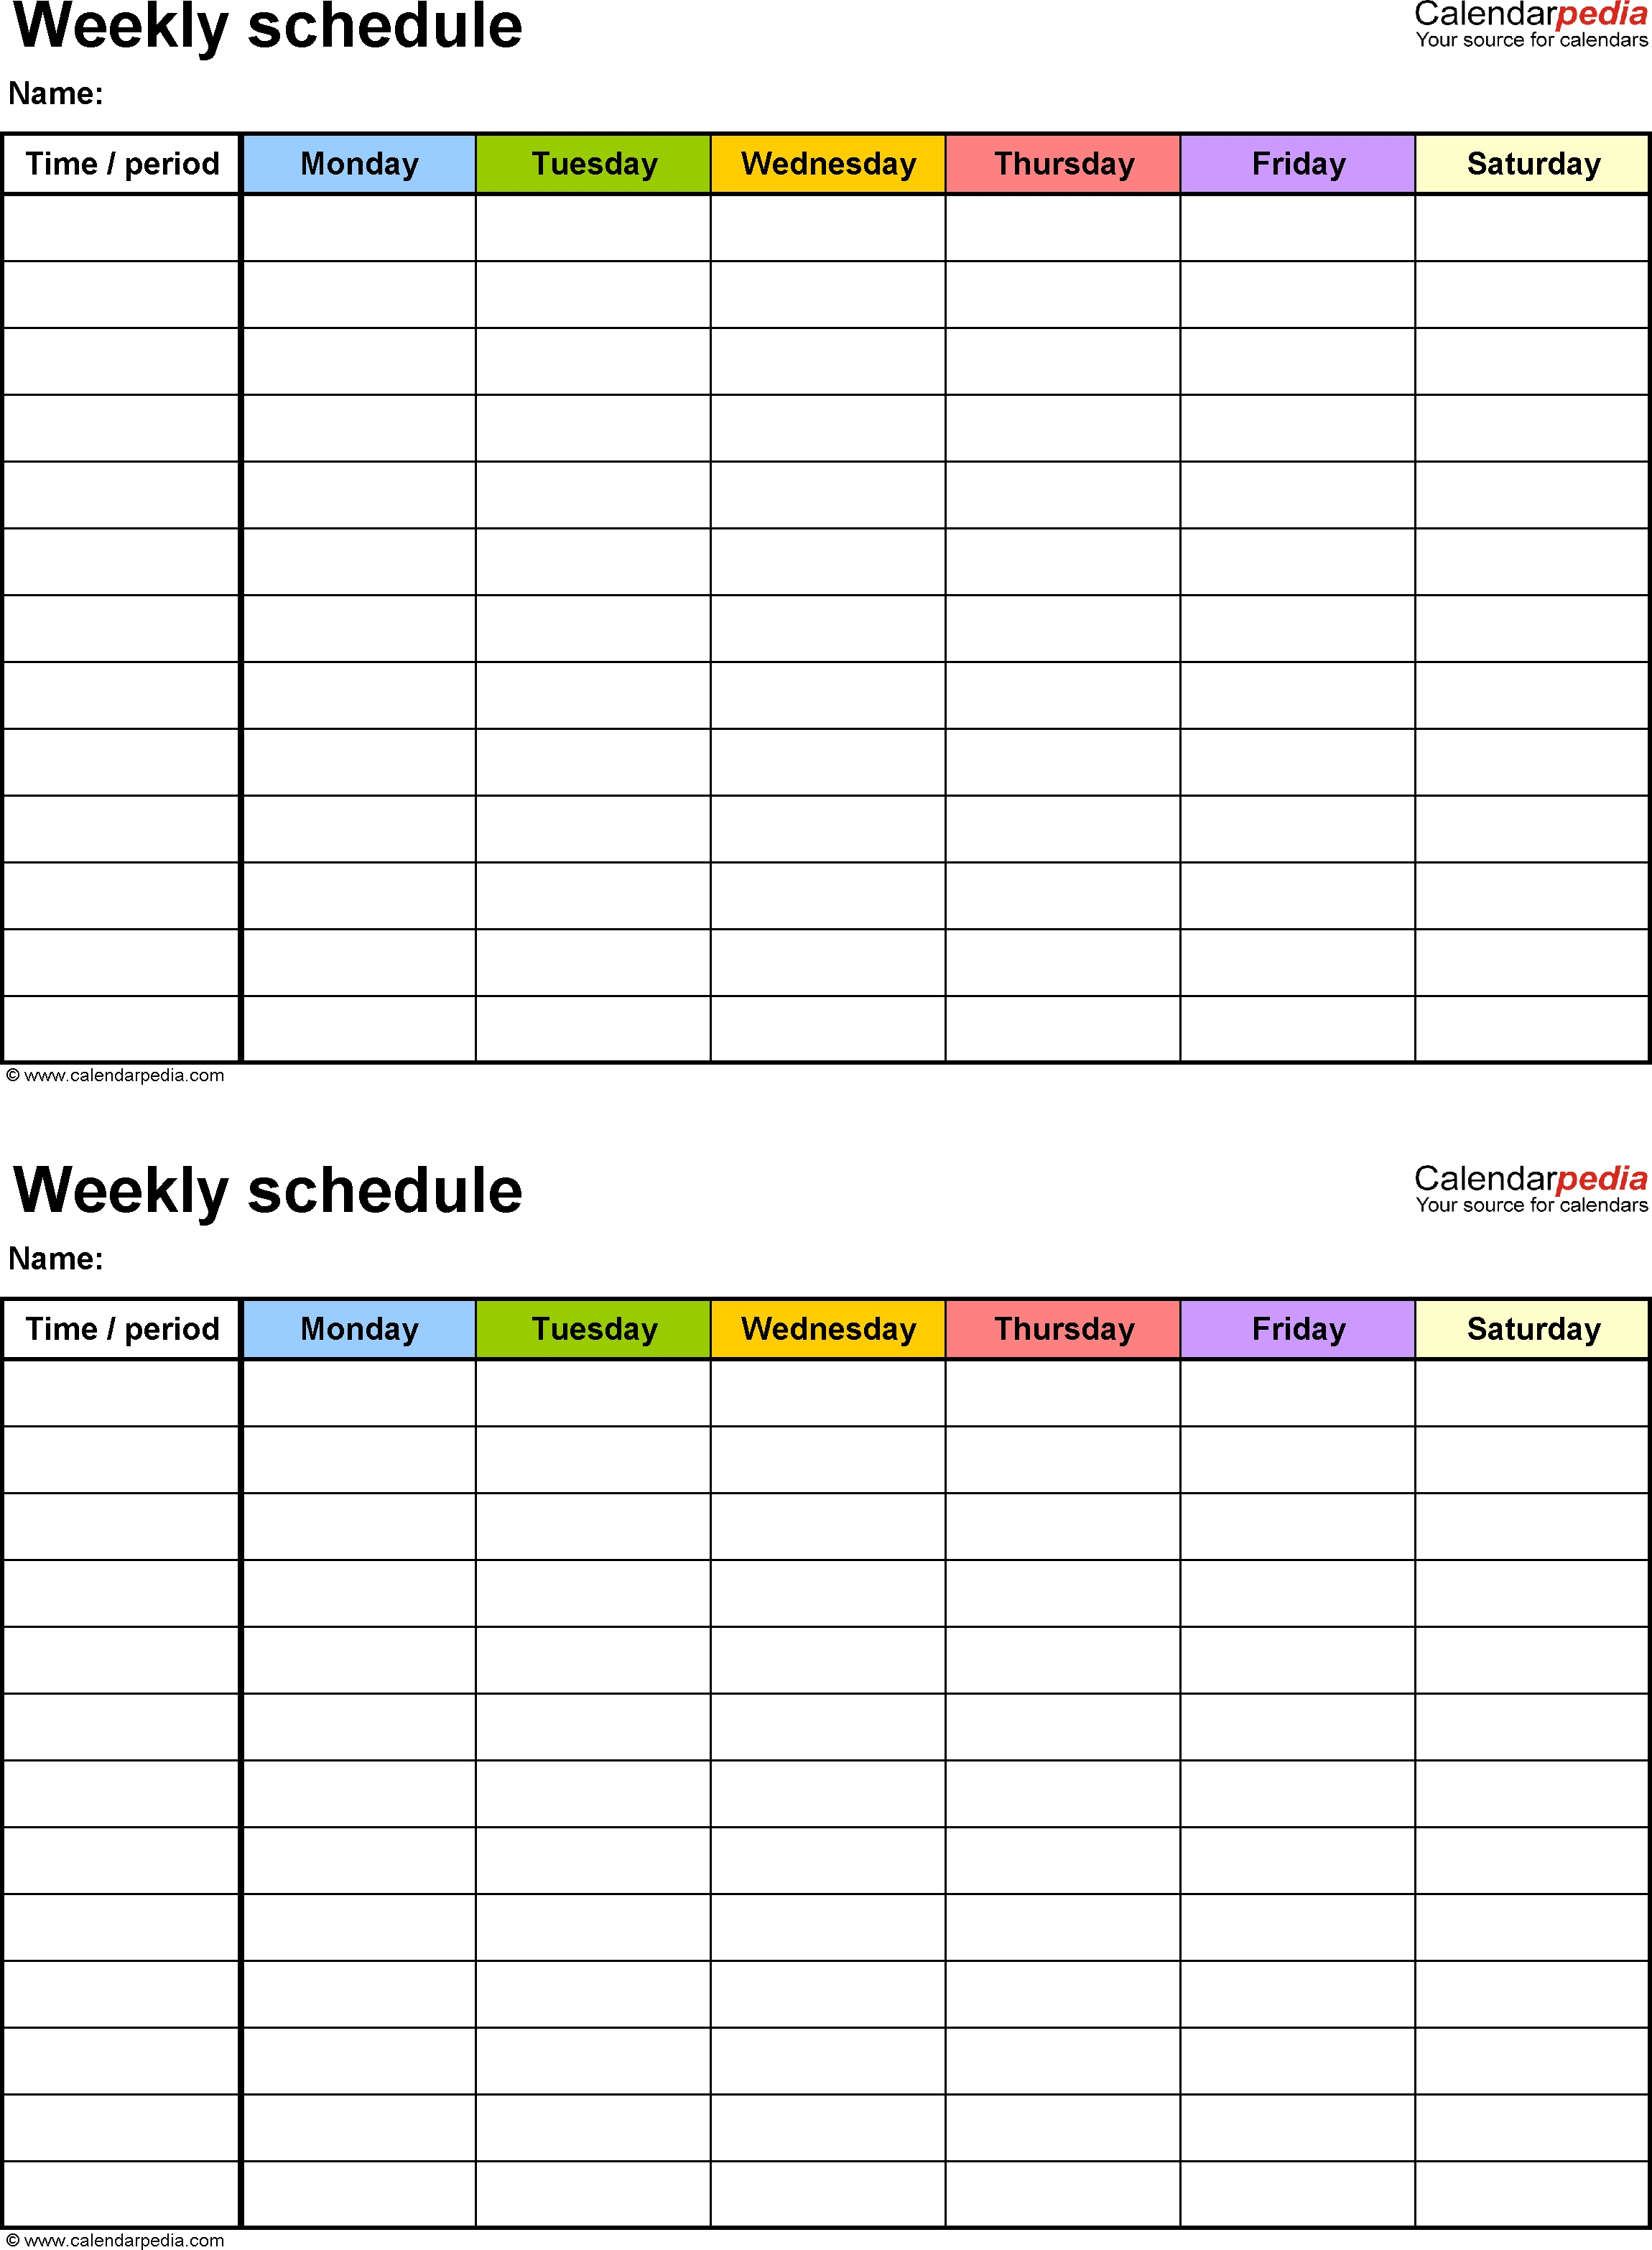 Free Weekly Schedule Templates For Word - 18 Templates inside Summer Camp Schedule Template Blank